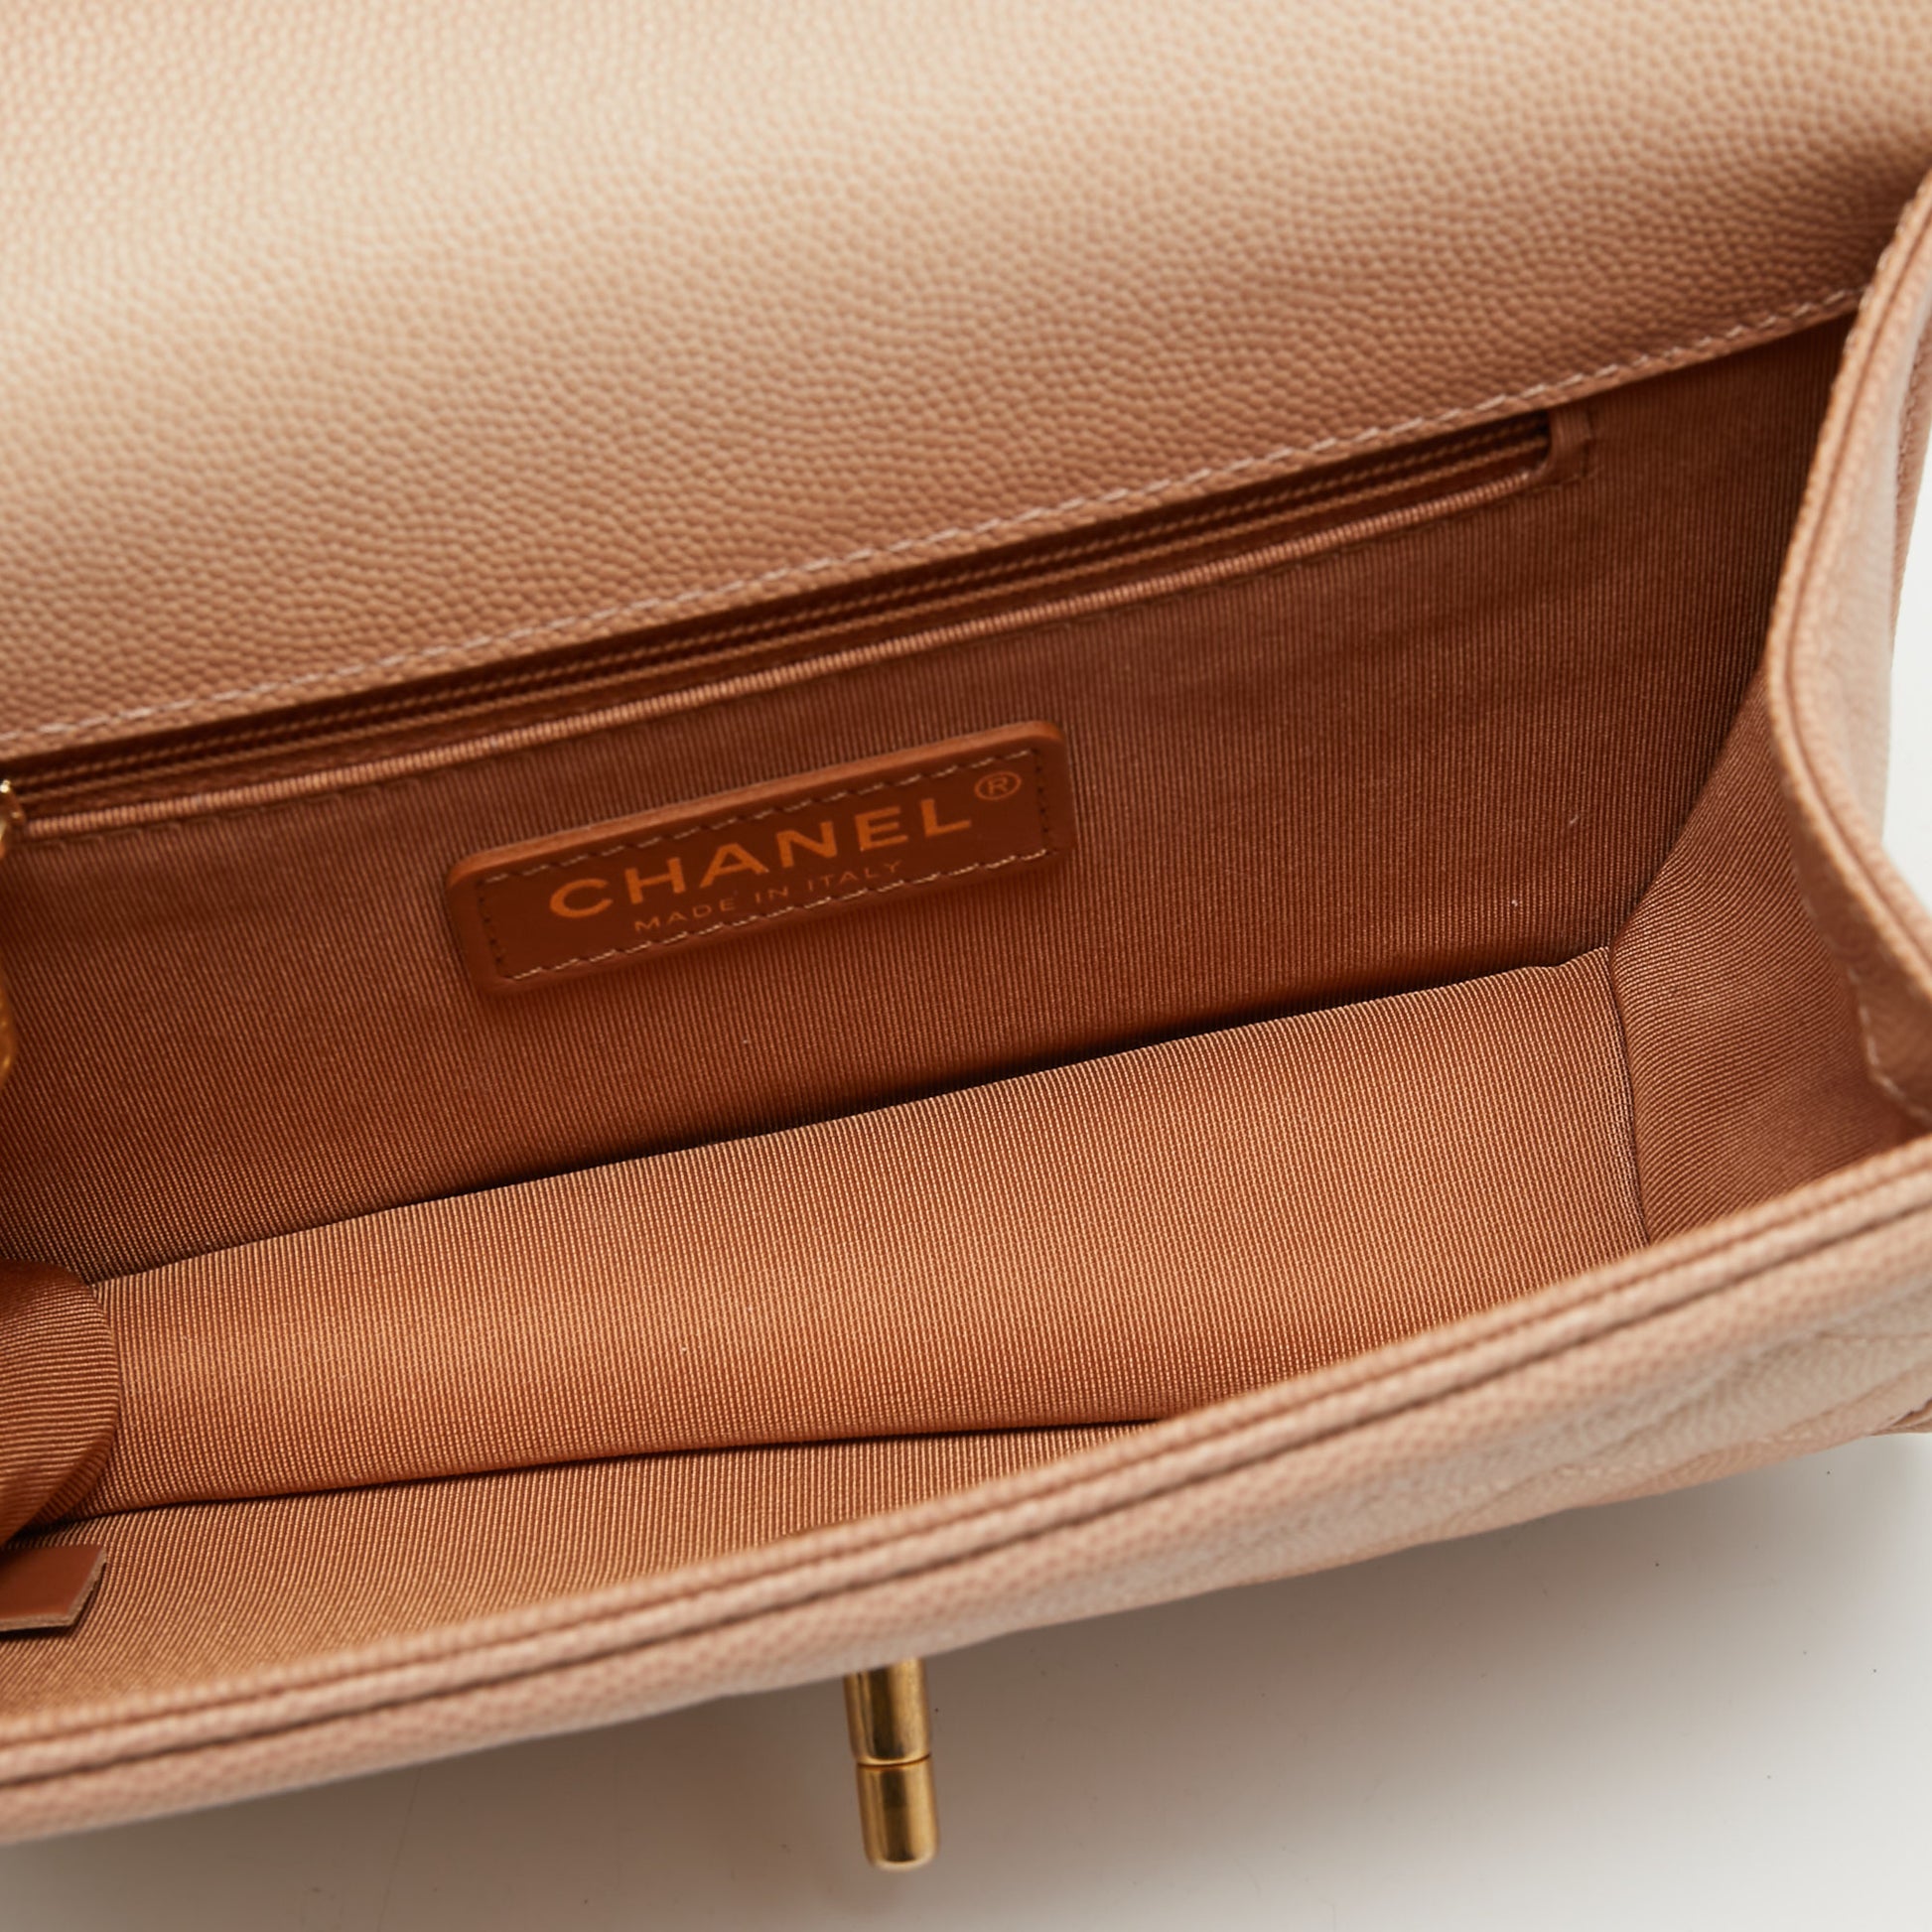 Chanel Beige Ombre Quilted Caviar Leather Sunset On The Sea Belt Bag